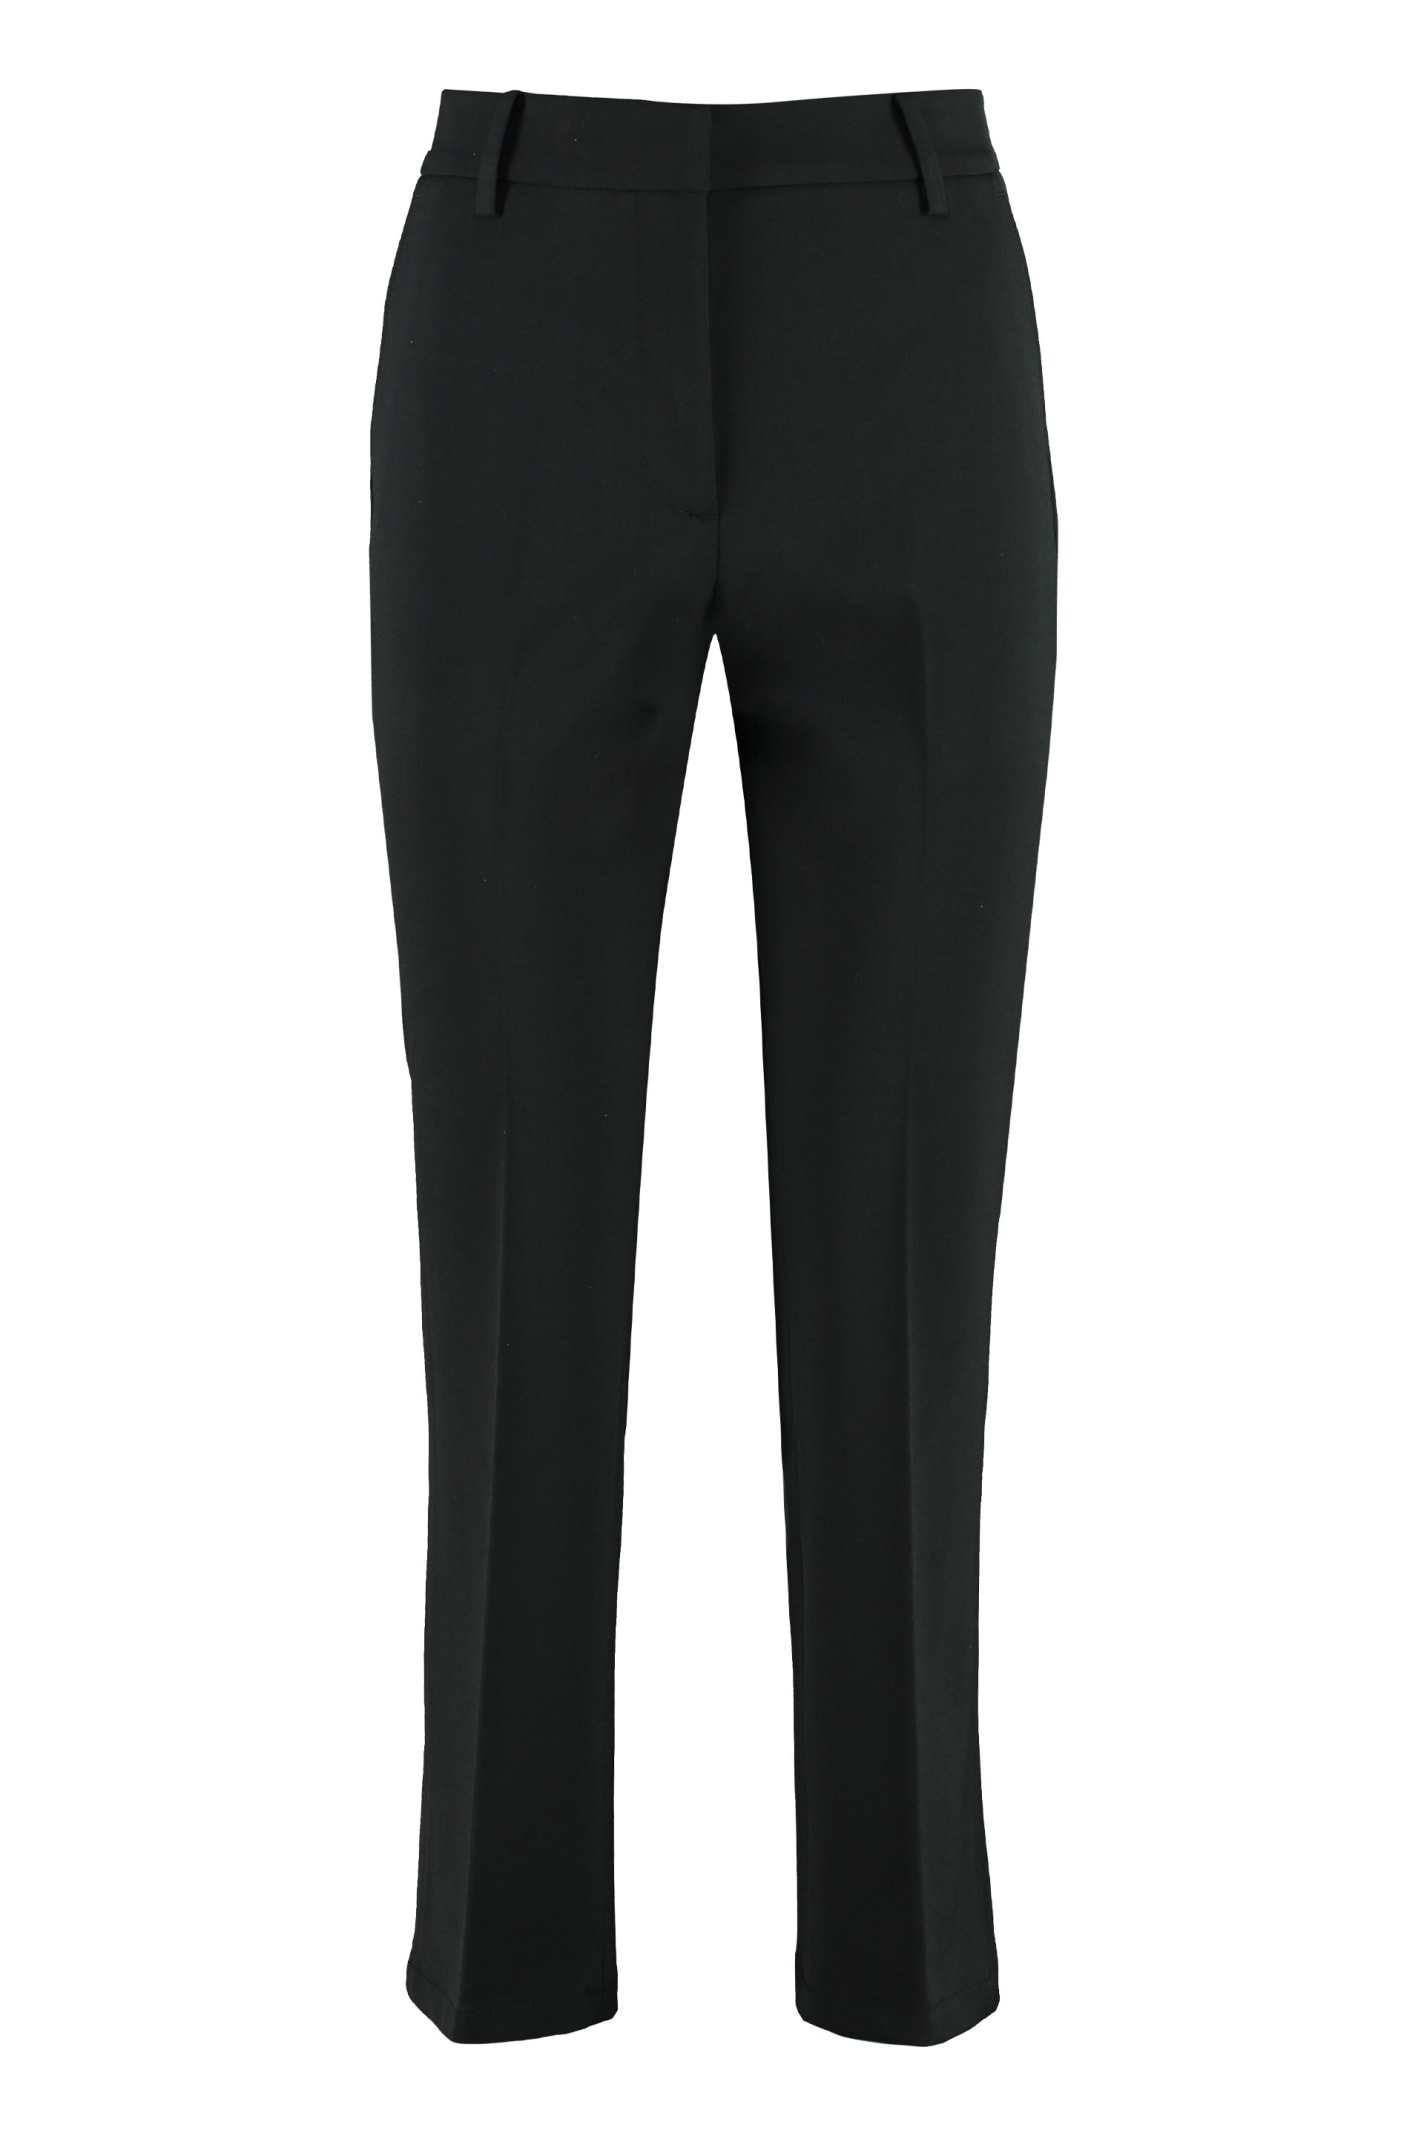 Department Five Jet Flared Trousers